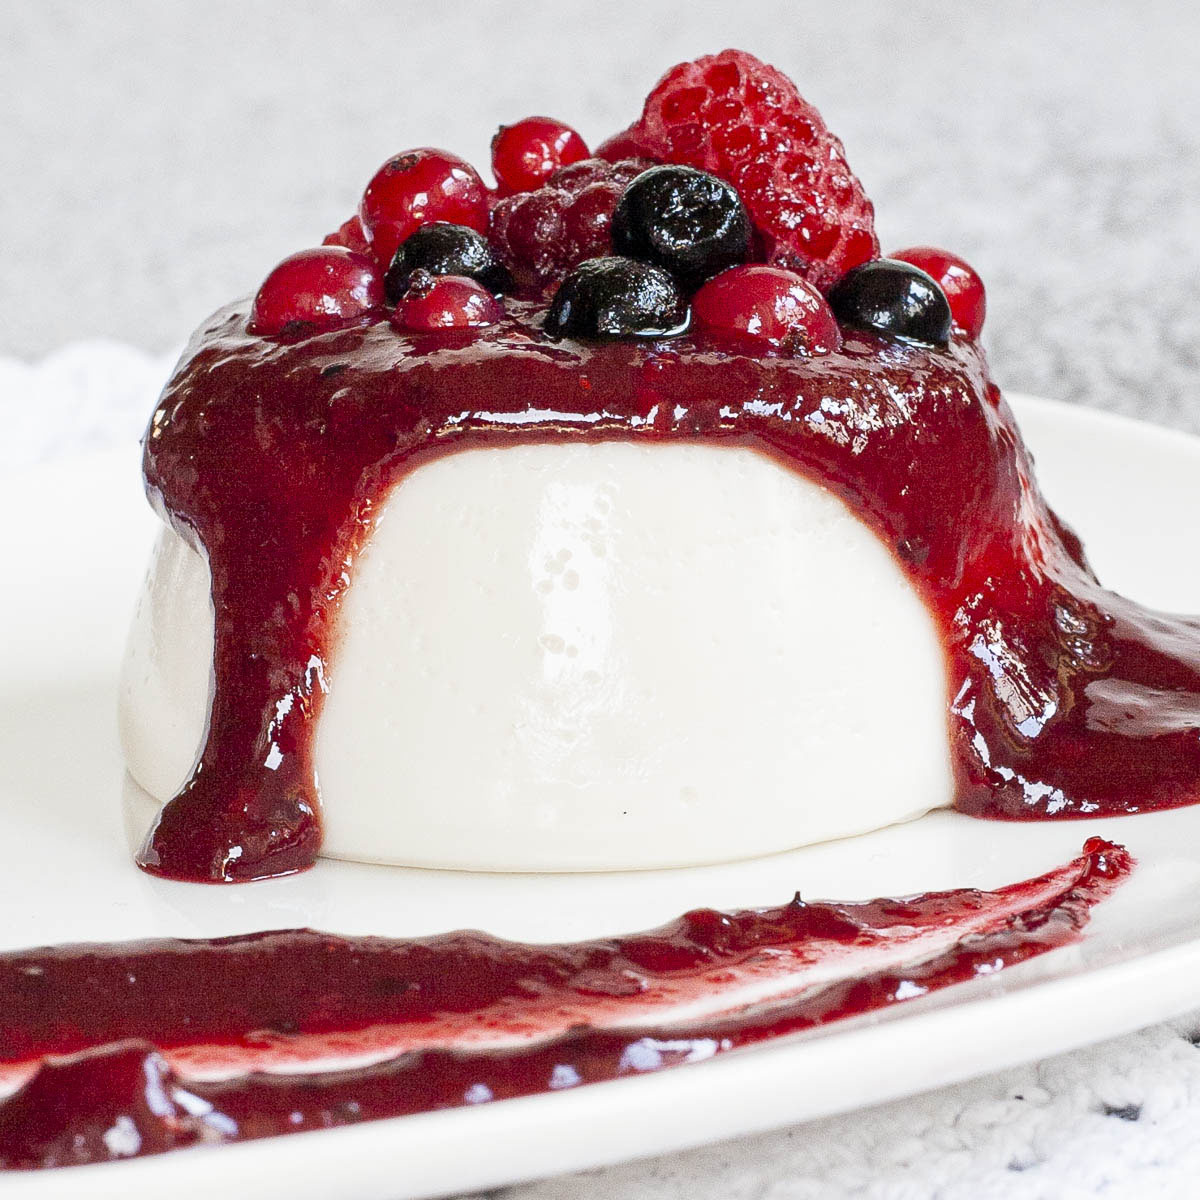 A white plate with white panna cotta topped with a thick purple sauce and different berries up really close.